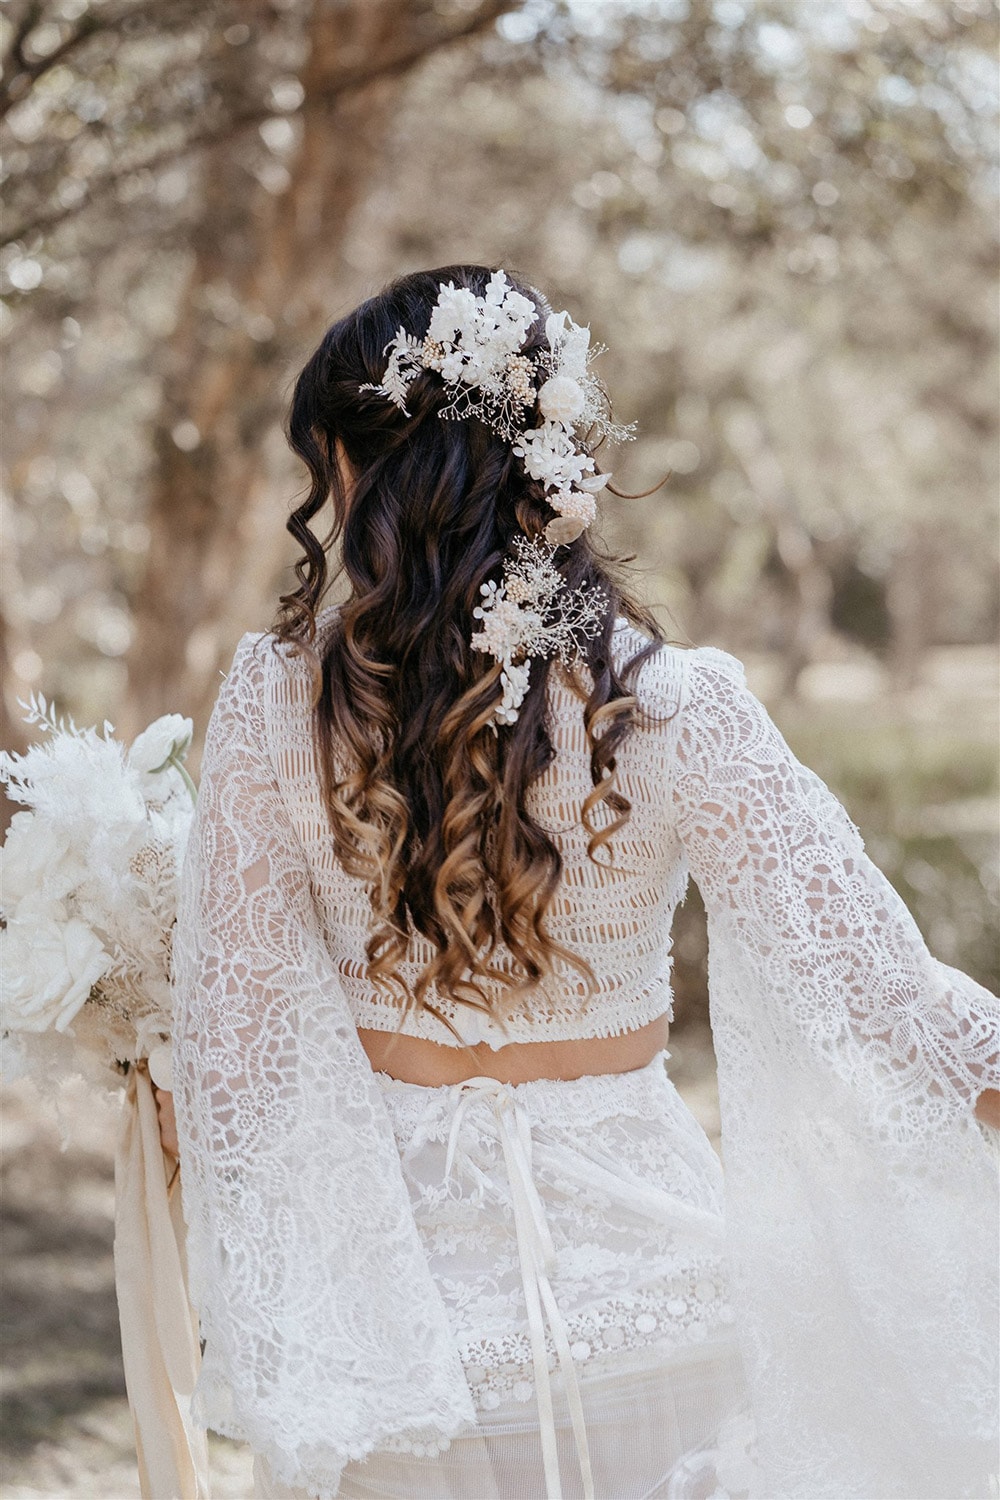 Chic Boho Weddings Are A Popular Trend For 2023